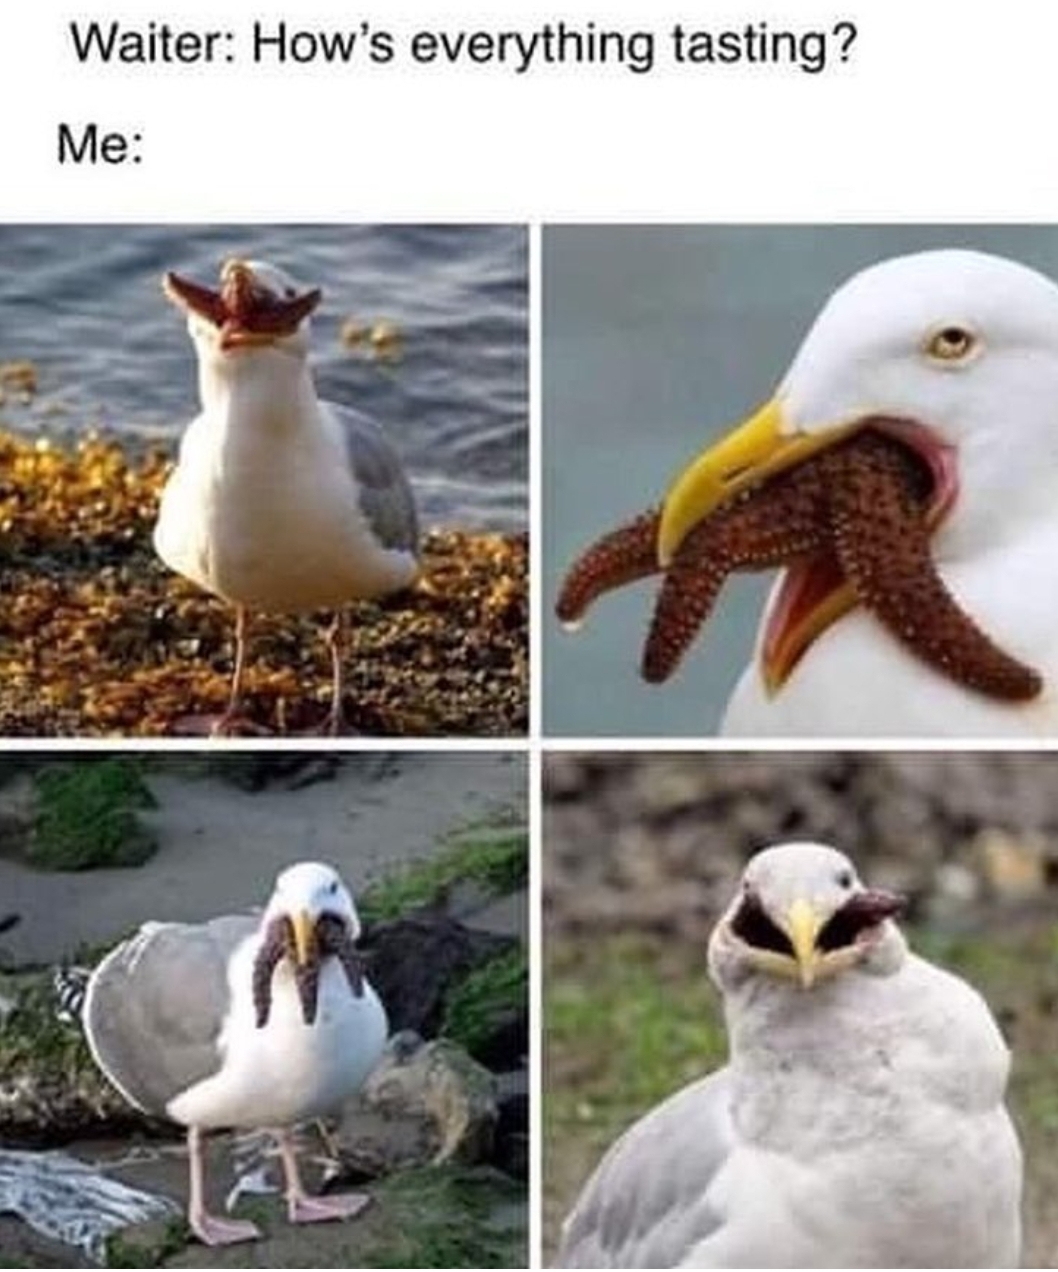 seagull eating a starfish - Waiter How's everything tasting? Me